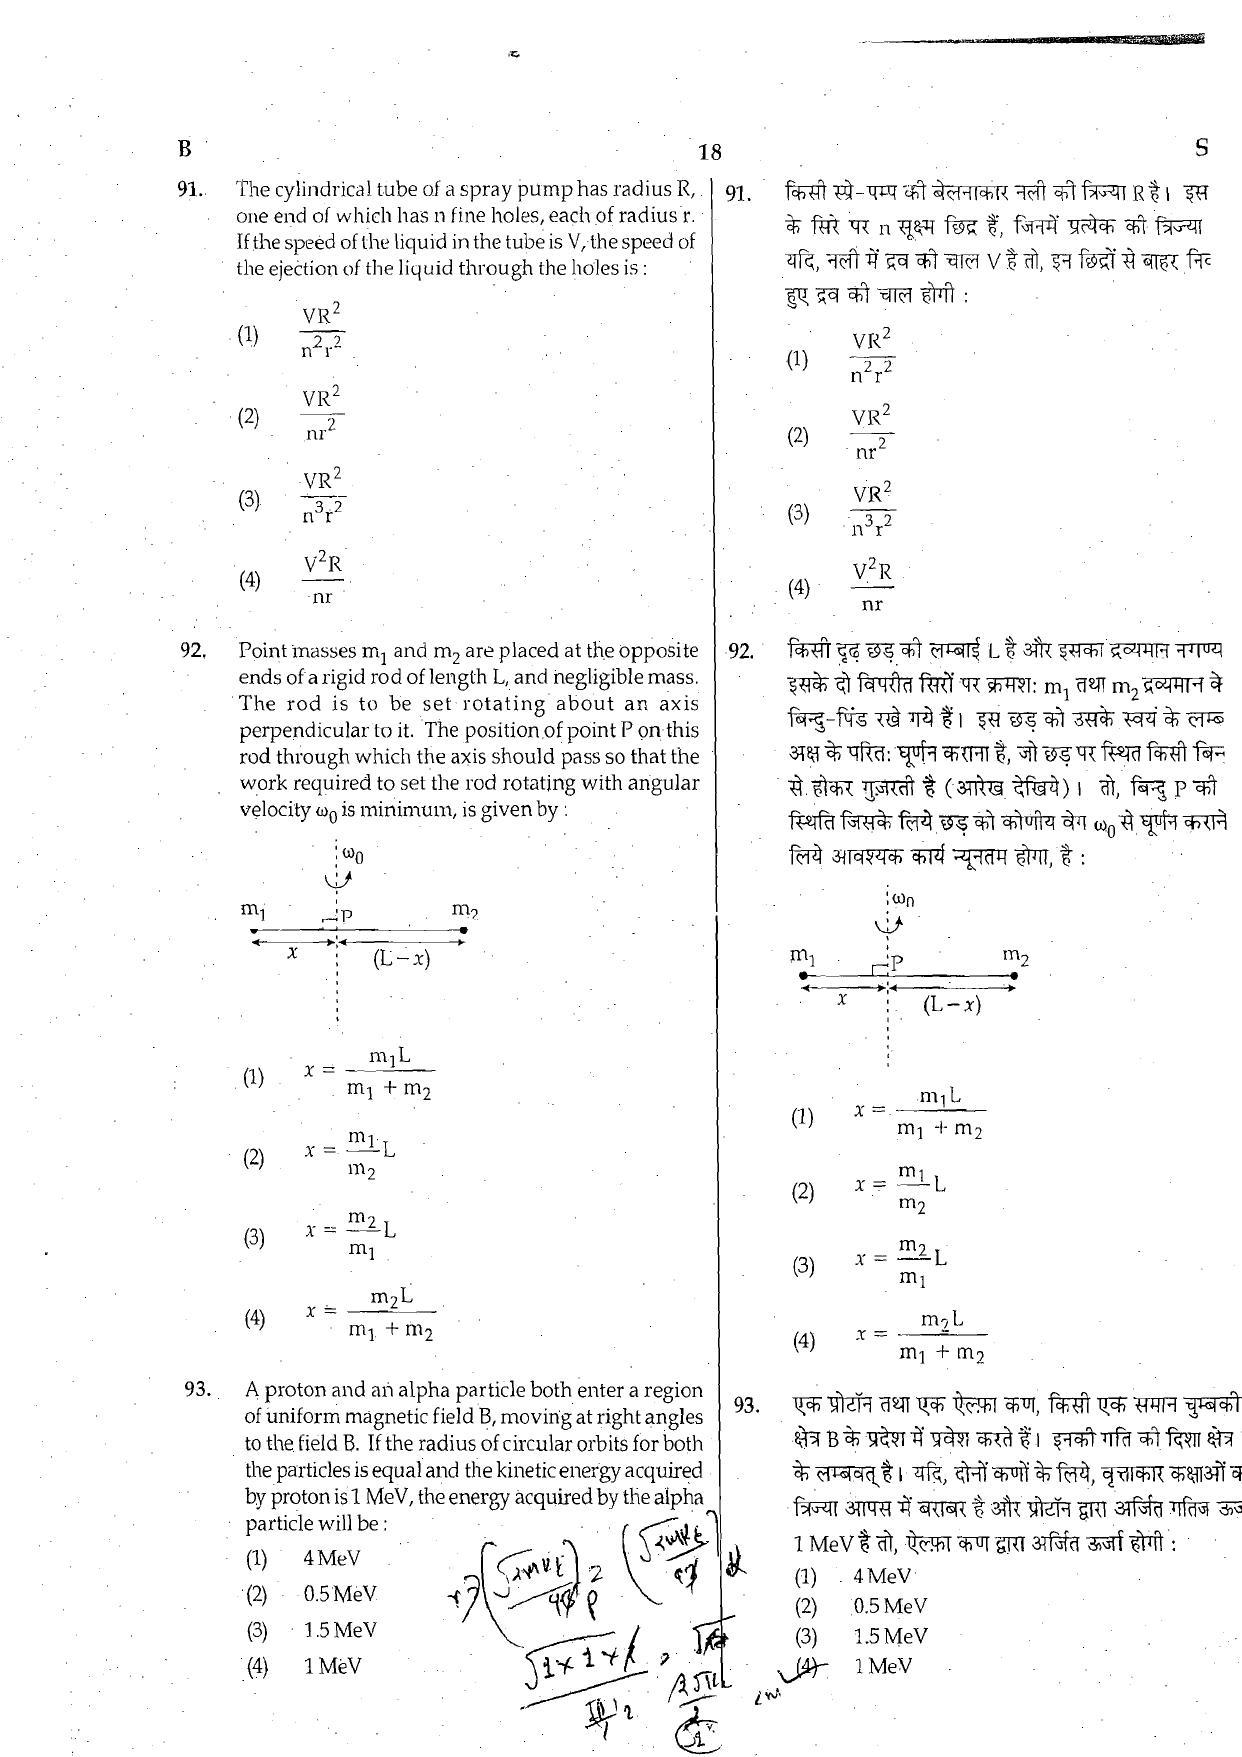 NEET Code B 2015 Question Paper - Page 18